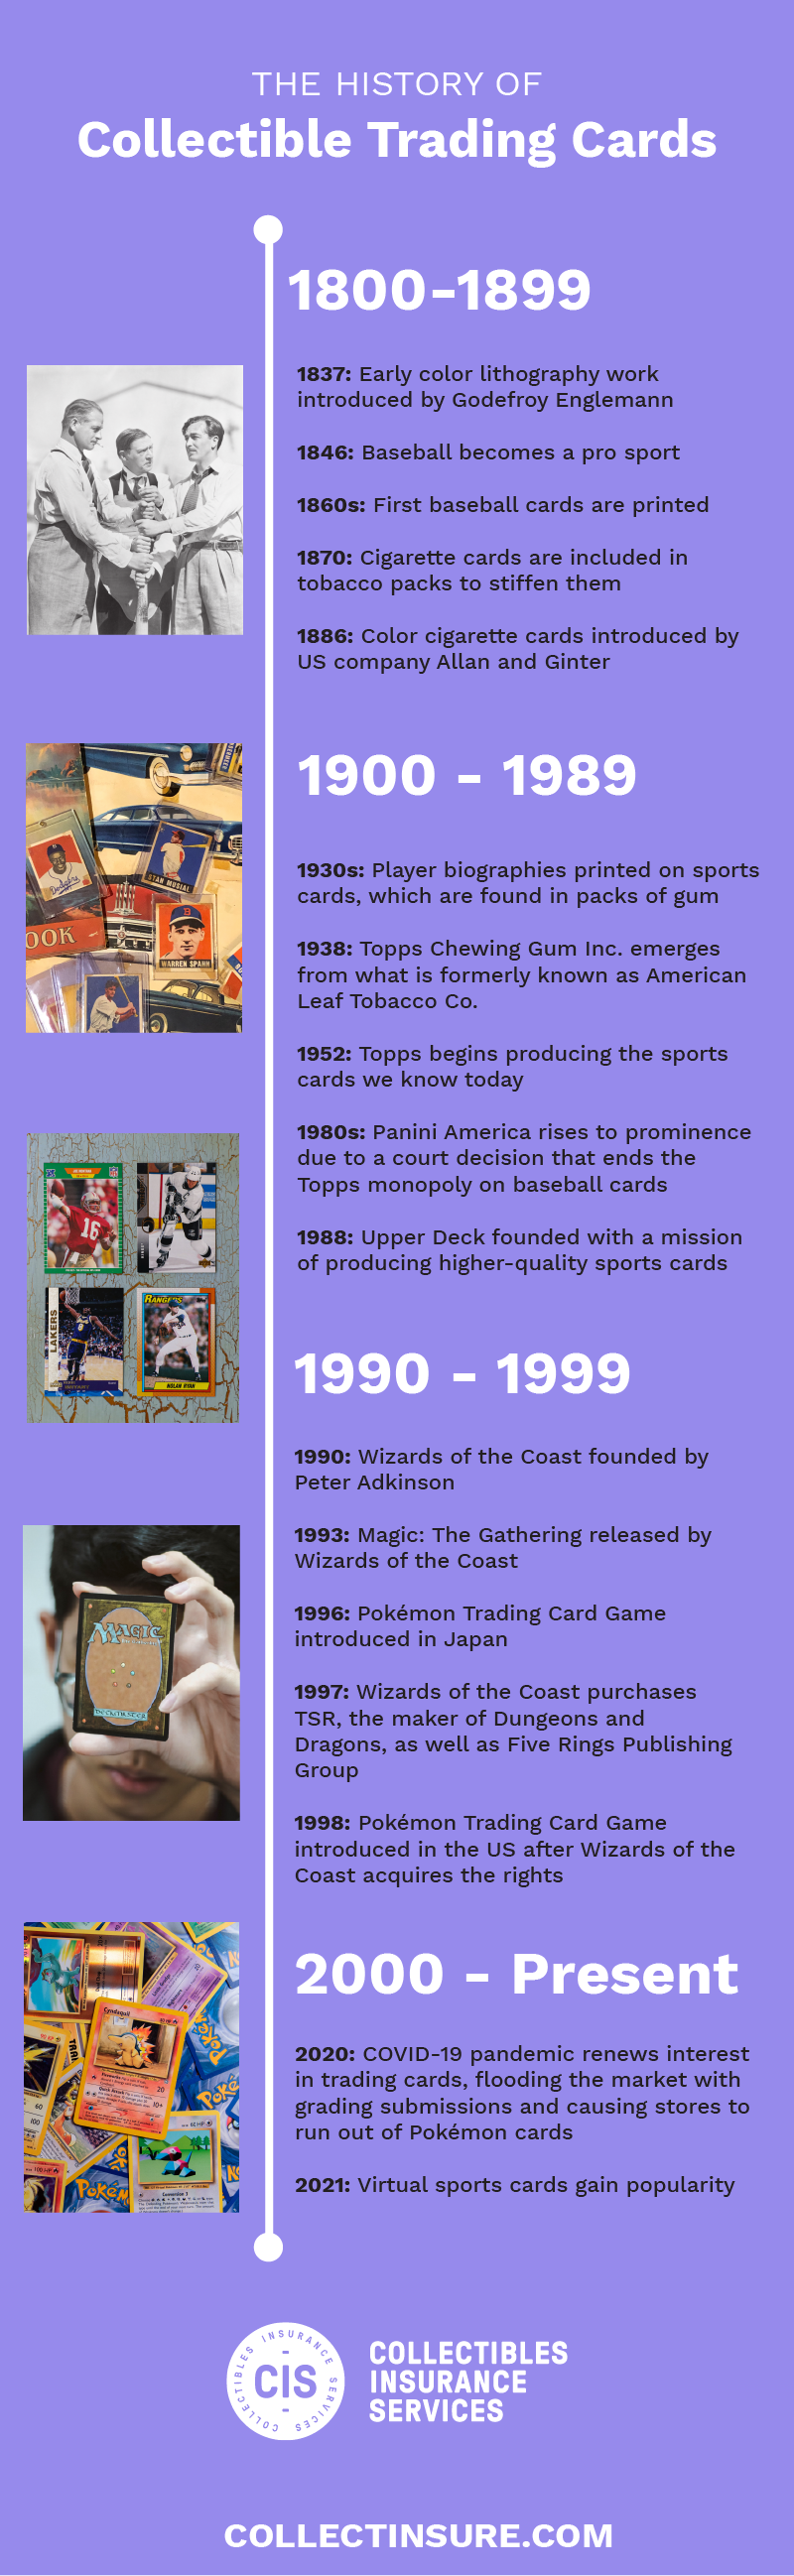 https://wp.global-indemnity.com/cis2022/wp-content/uploads/sites/15/2022/08/Infographic-The-History-of-Collectible-Trading-Cards-01.png